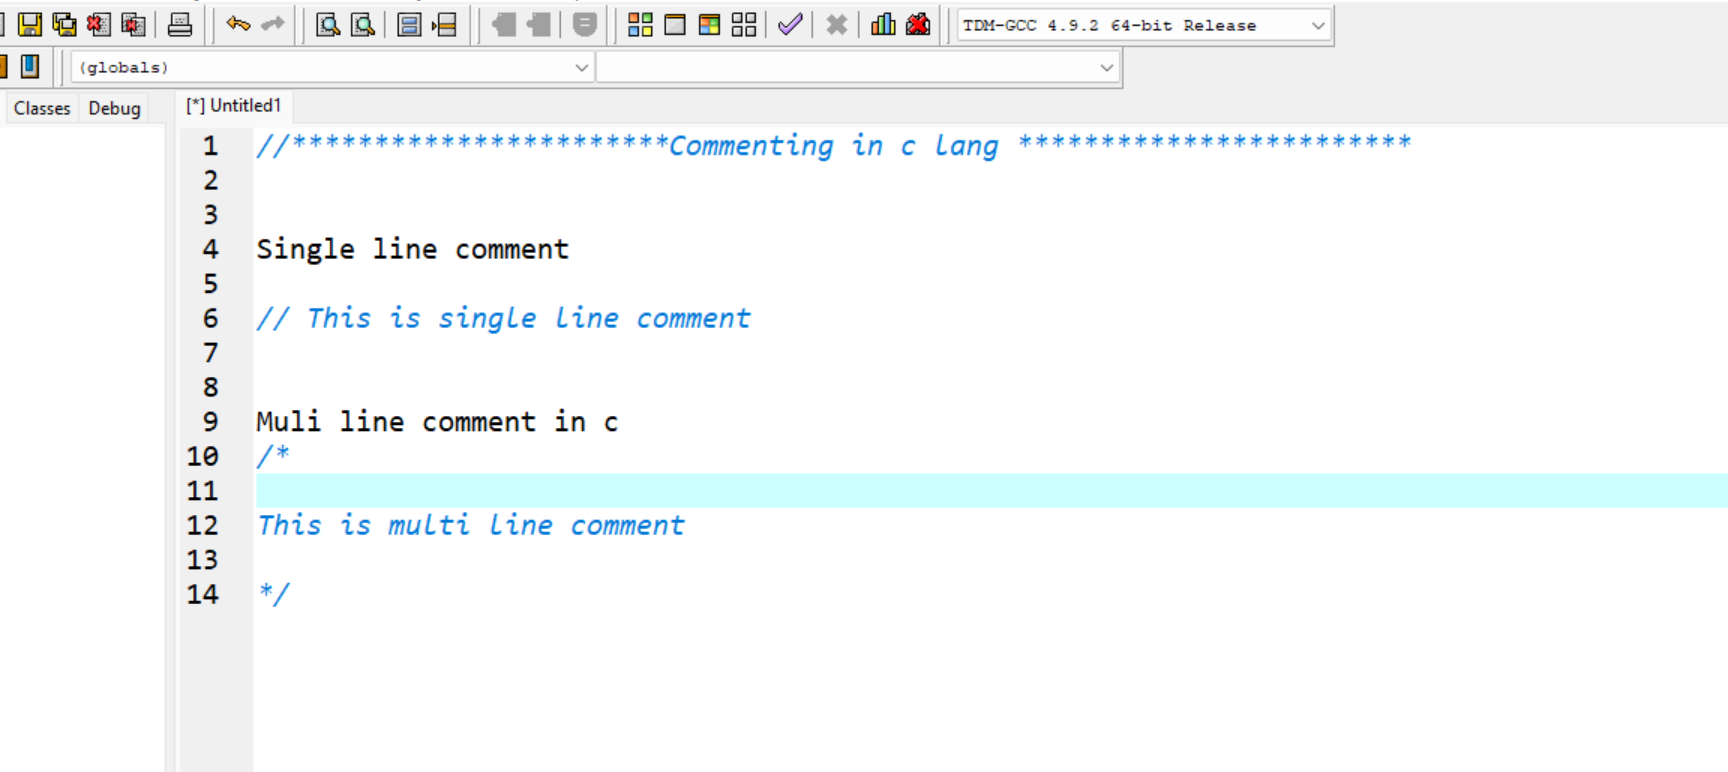 Commenting in c lang